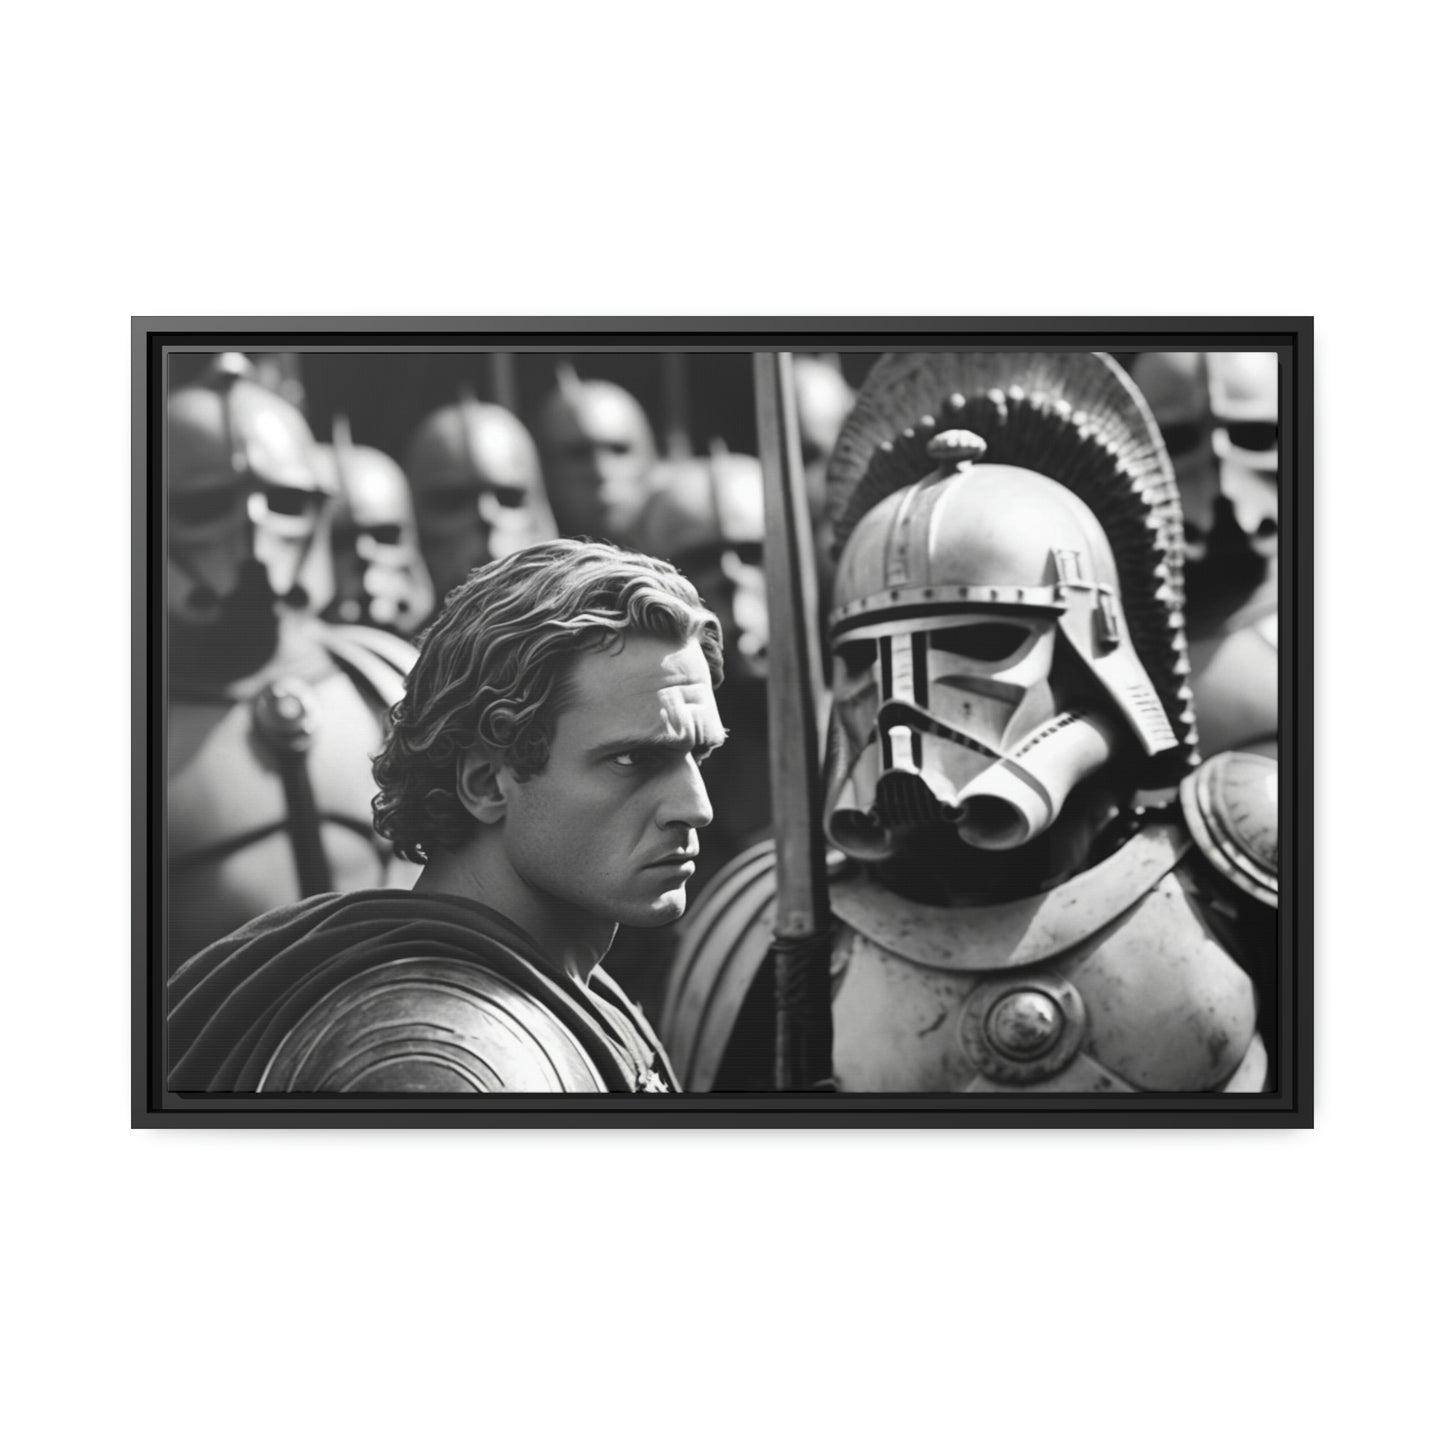 Alexander the Great, Stormtroopers: Canvas Art